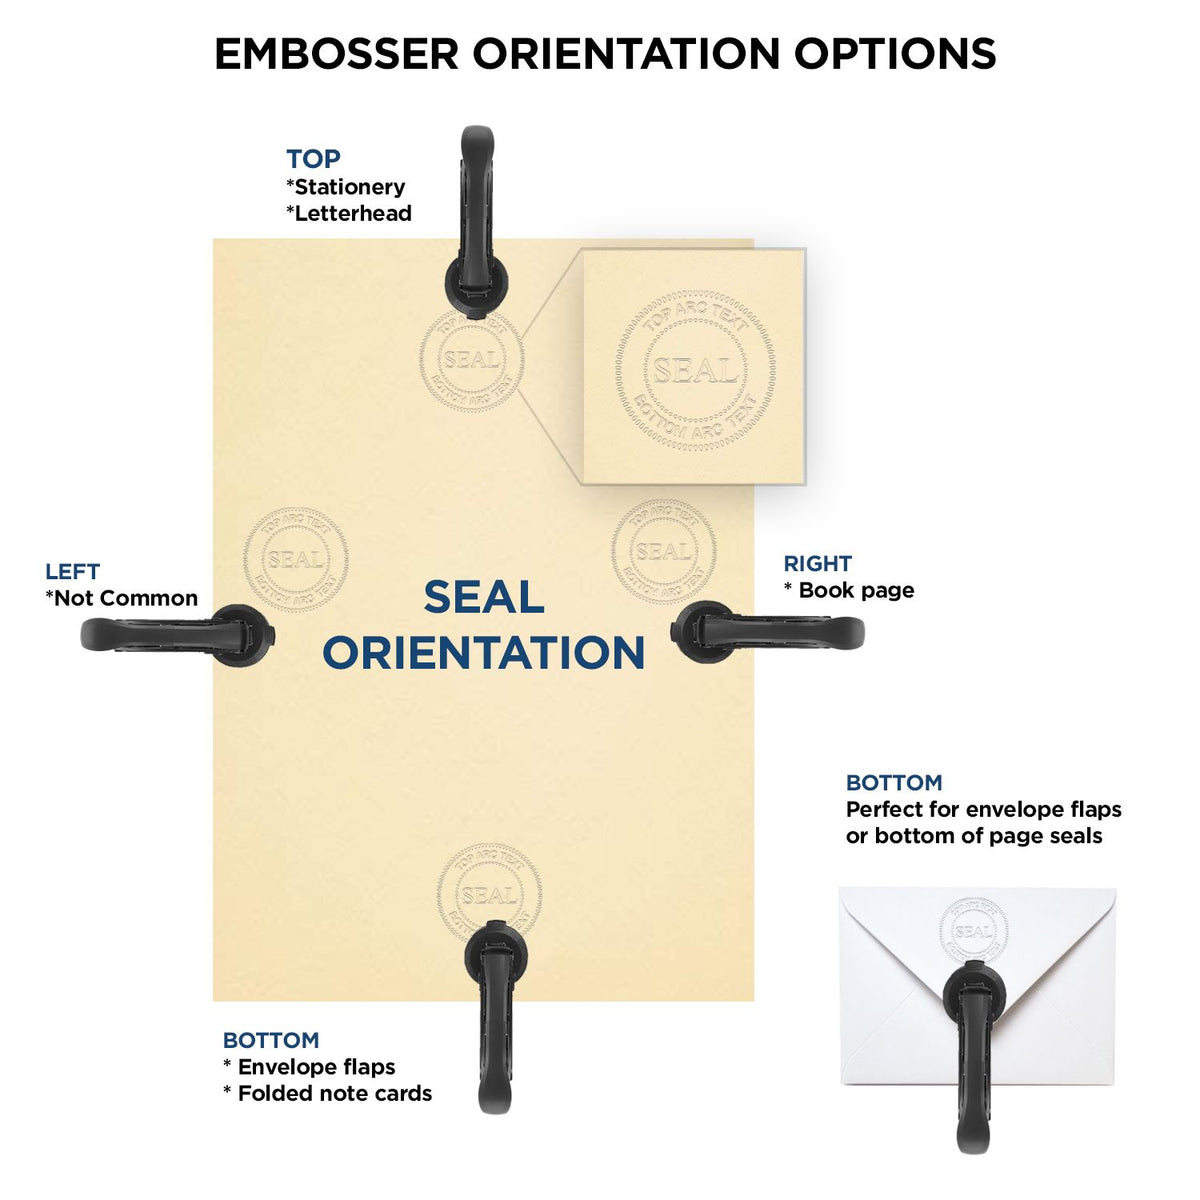 An infographic for the State of Ohio Extended Long Reach Engineer Seal showing embosser orientation, this is showing examples of a top, bottom, right and left insert.